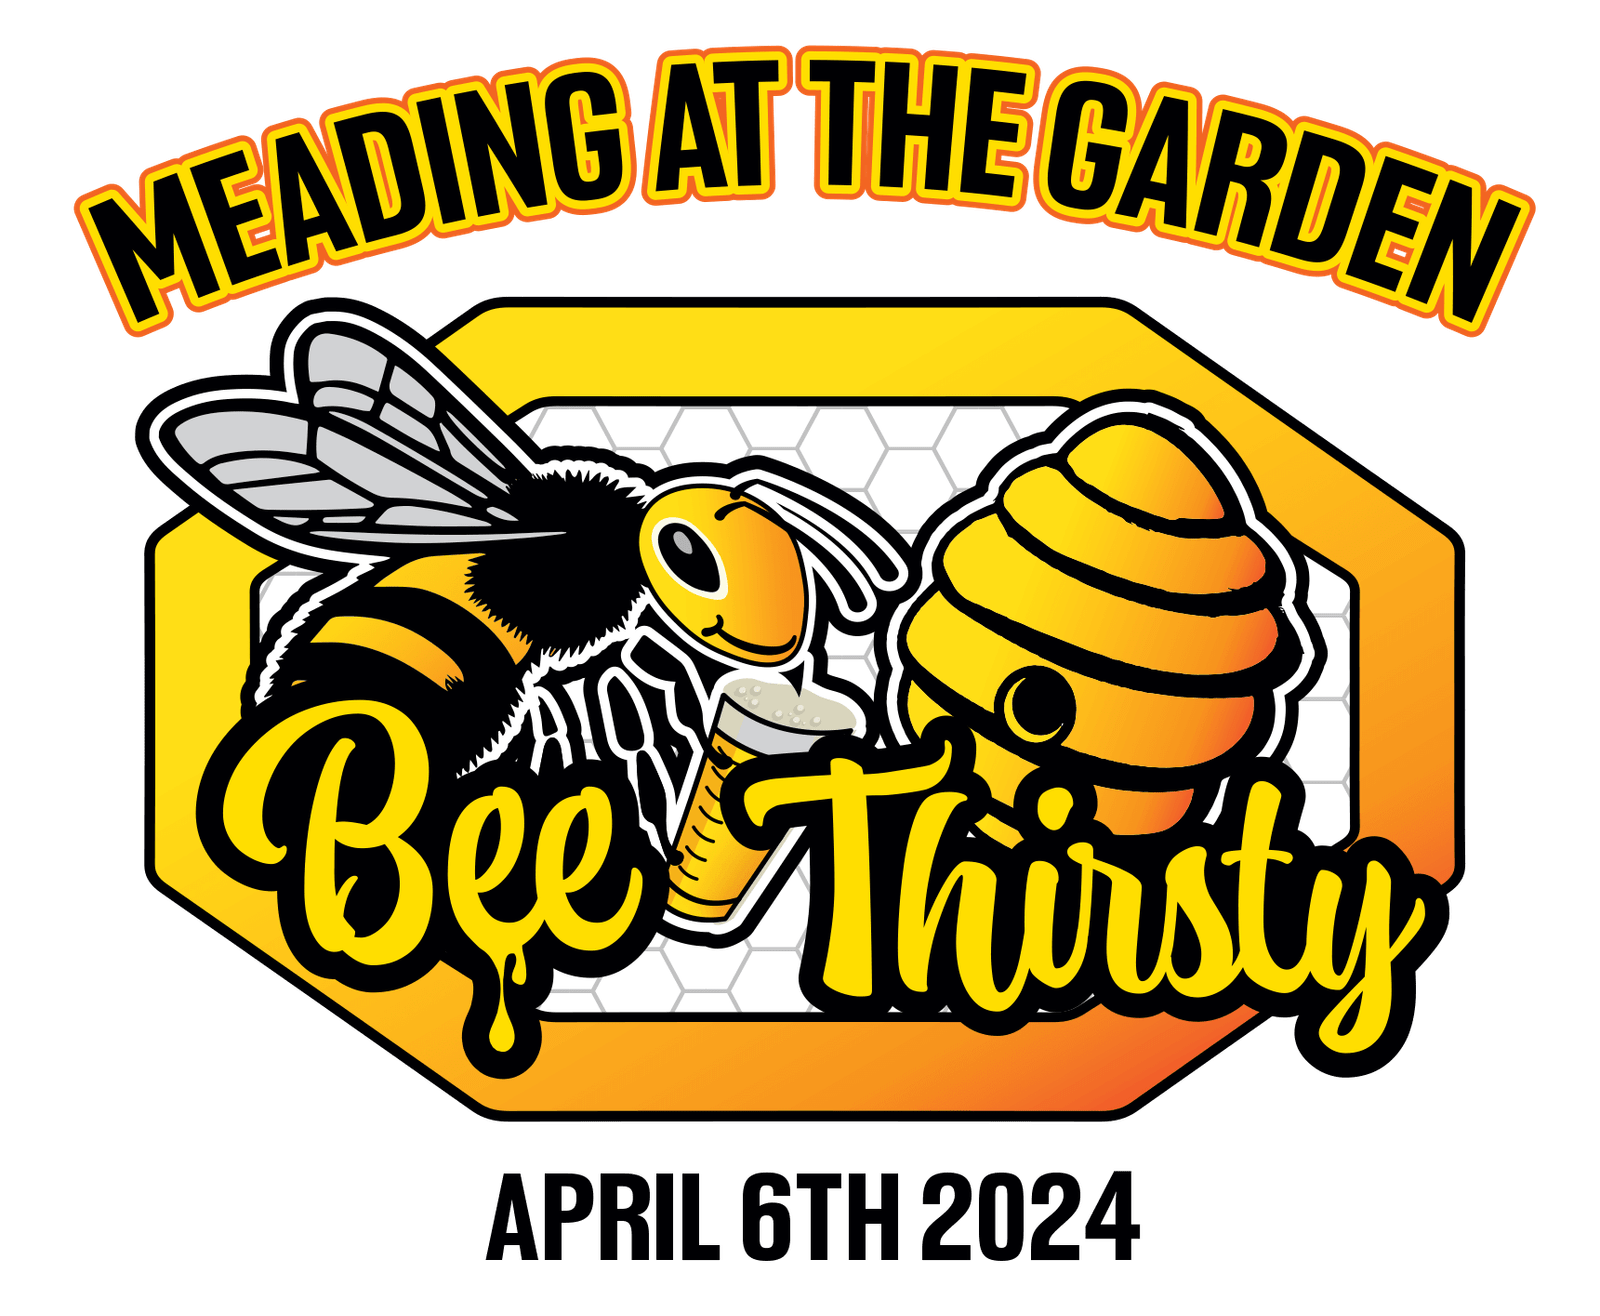 Meading.org - Meading at the Garden 2024 - Bee Thirsty Honey